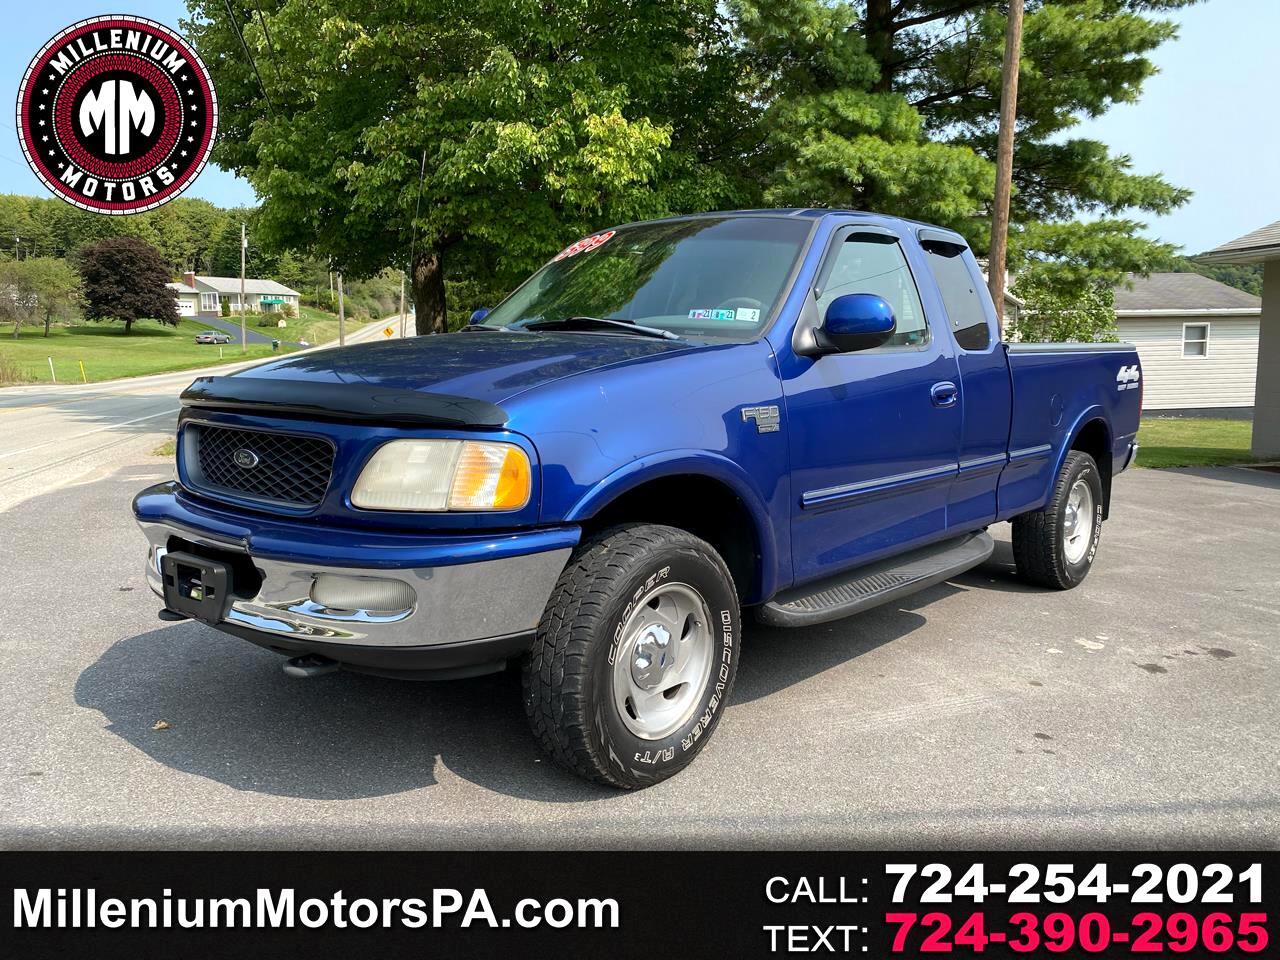 Used 1998 Ford F-150 Supercab 139" 4WD for Sale in Marion Center PA 1998 Ford F150 5.4 Towing Capacity